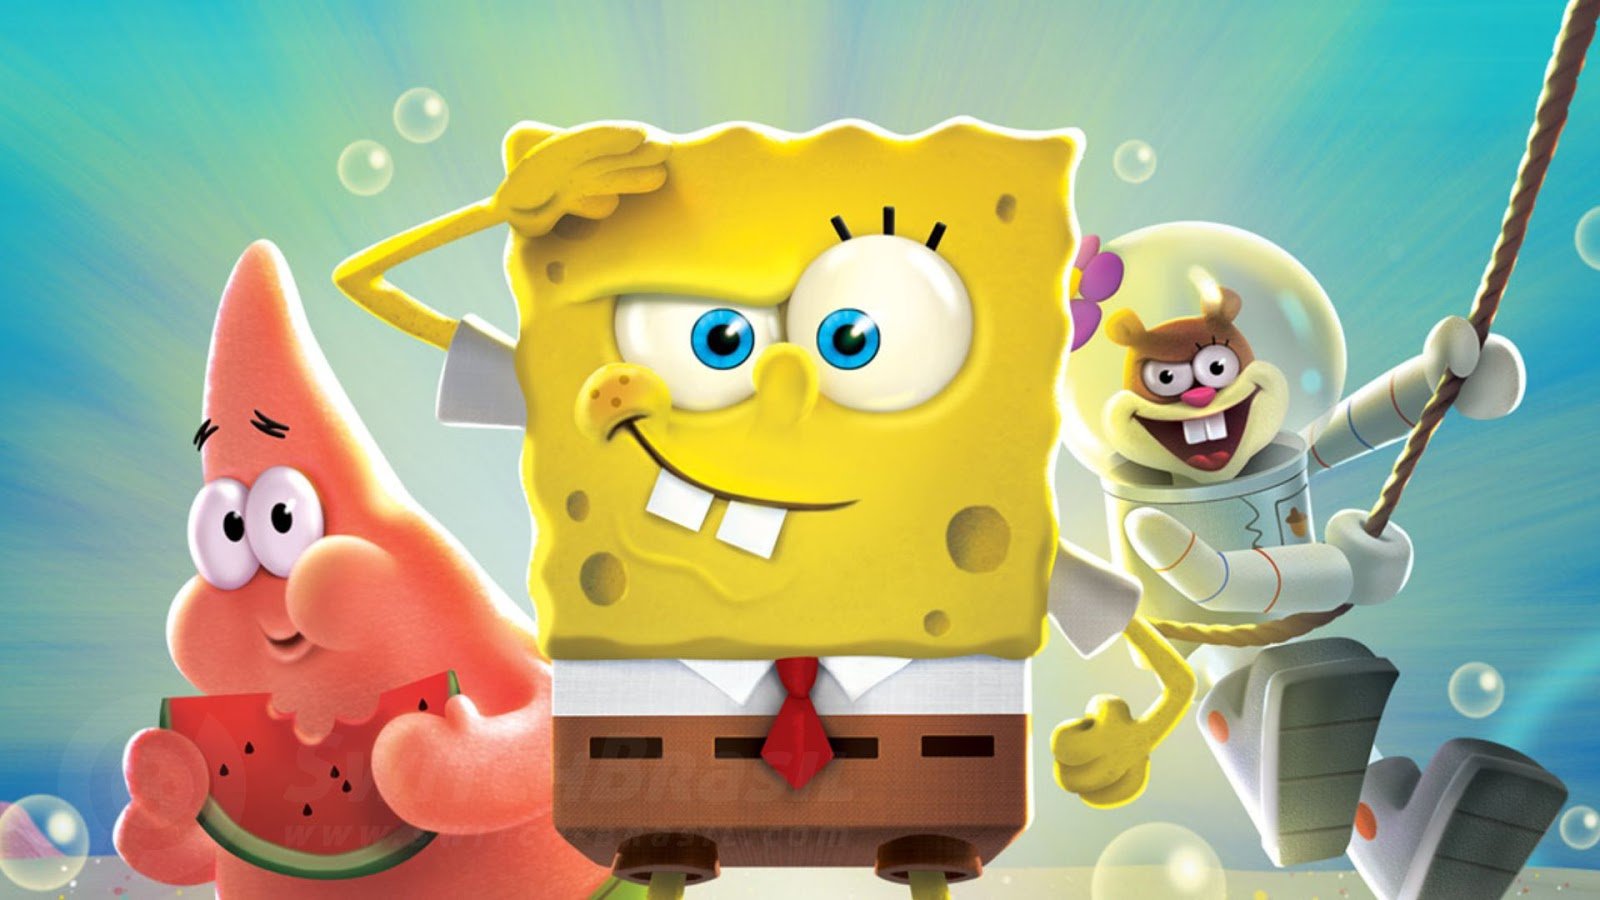 SpongeBob SquarePants: The Most Important Show to Generation Z and